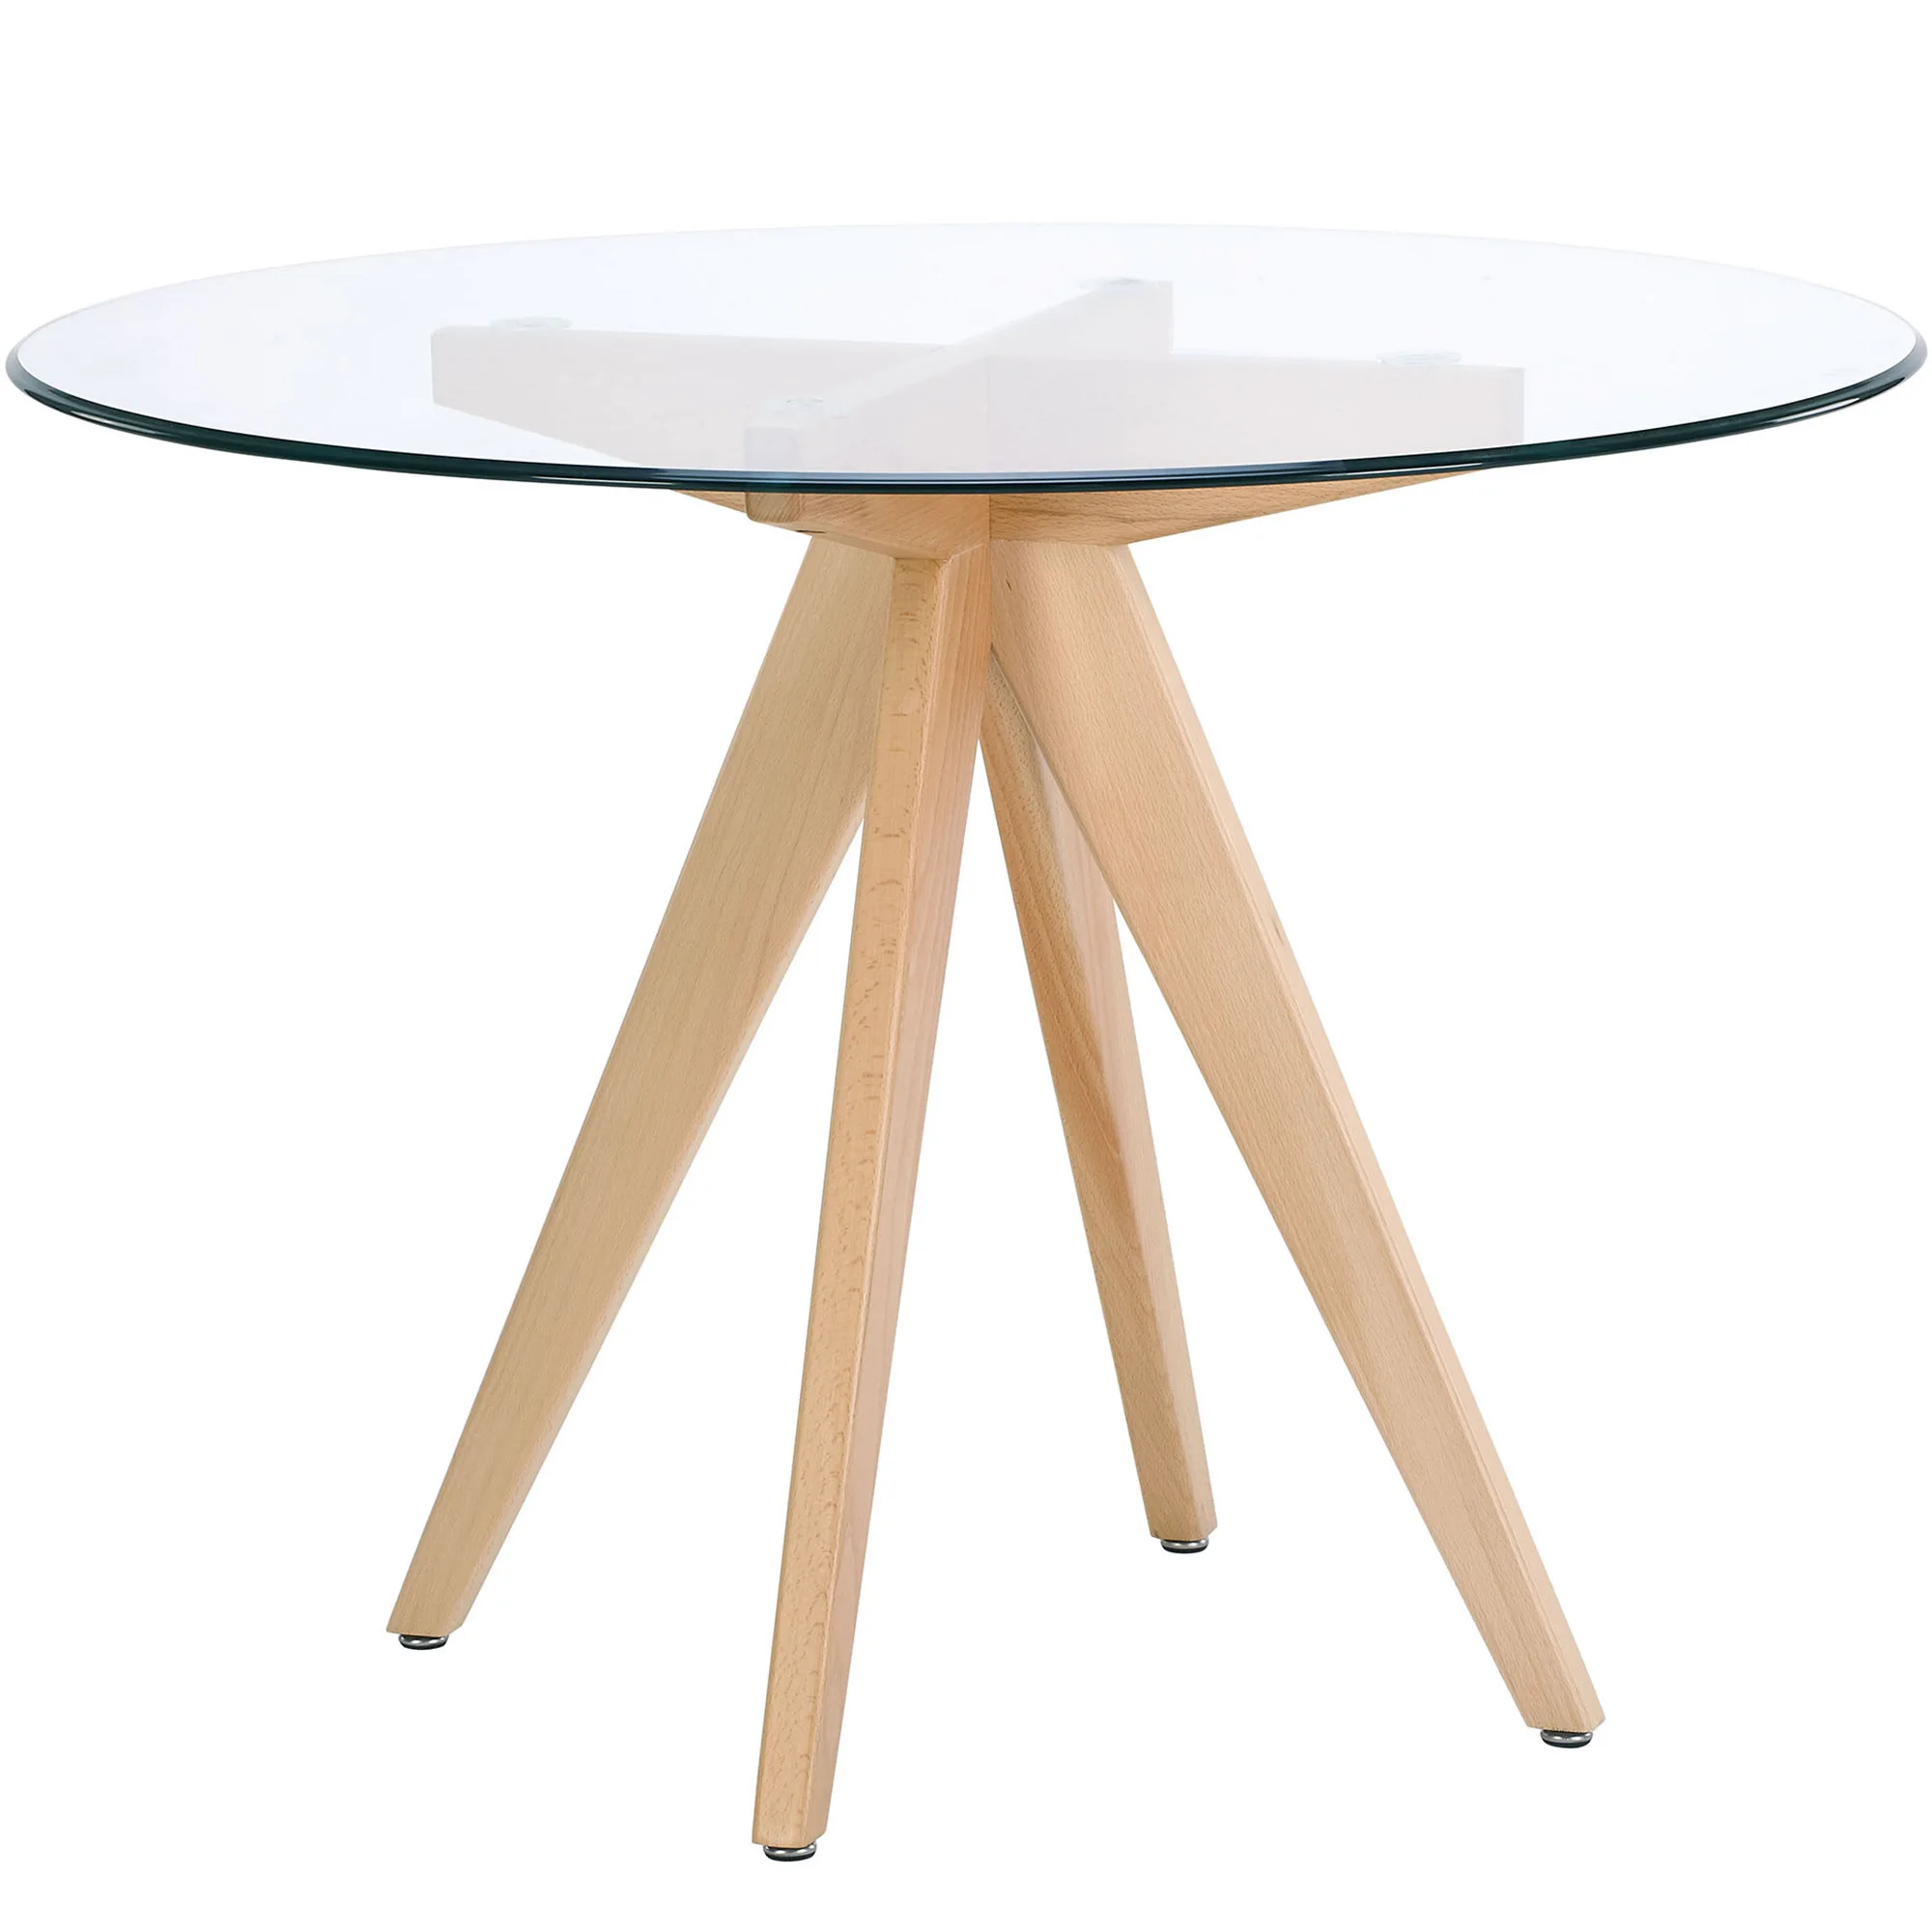 Wholesale Cheap Price Round Tables Furniture Wooden Dining Table For Sale Buy Dining Table Wooden Dining Table Round Tables Product On Alibaba Com